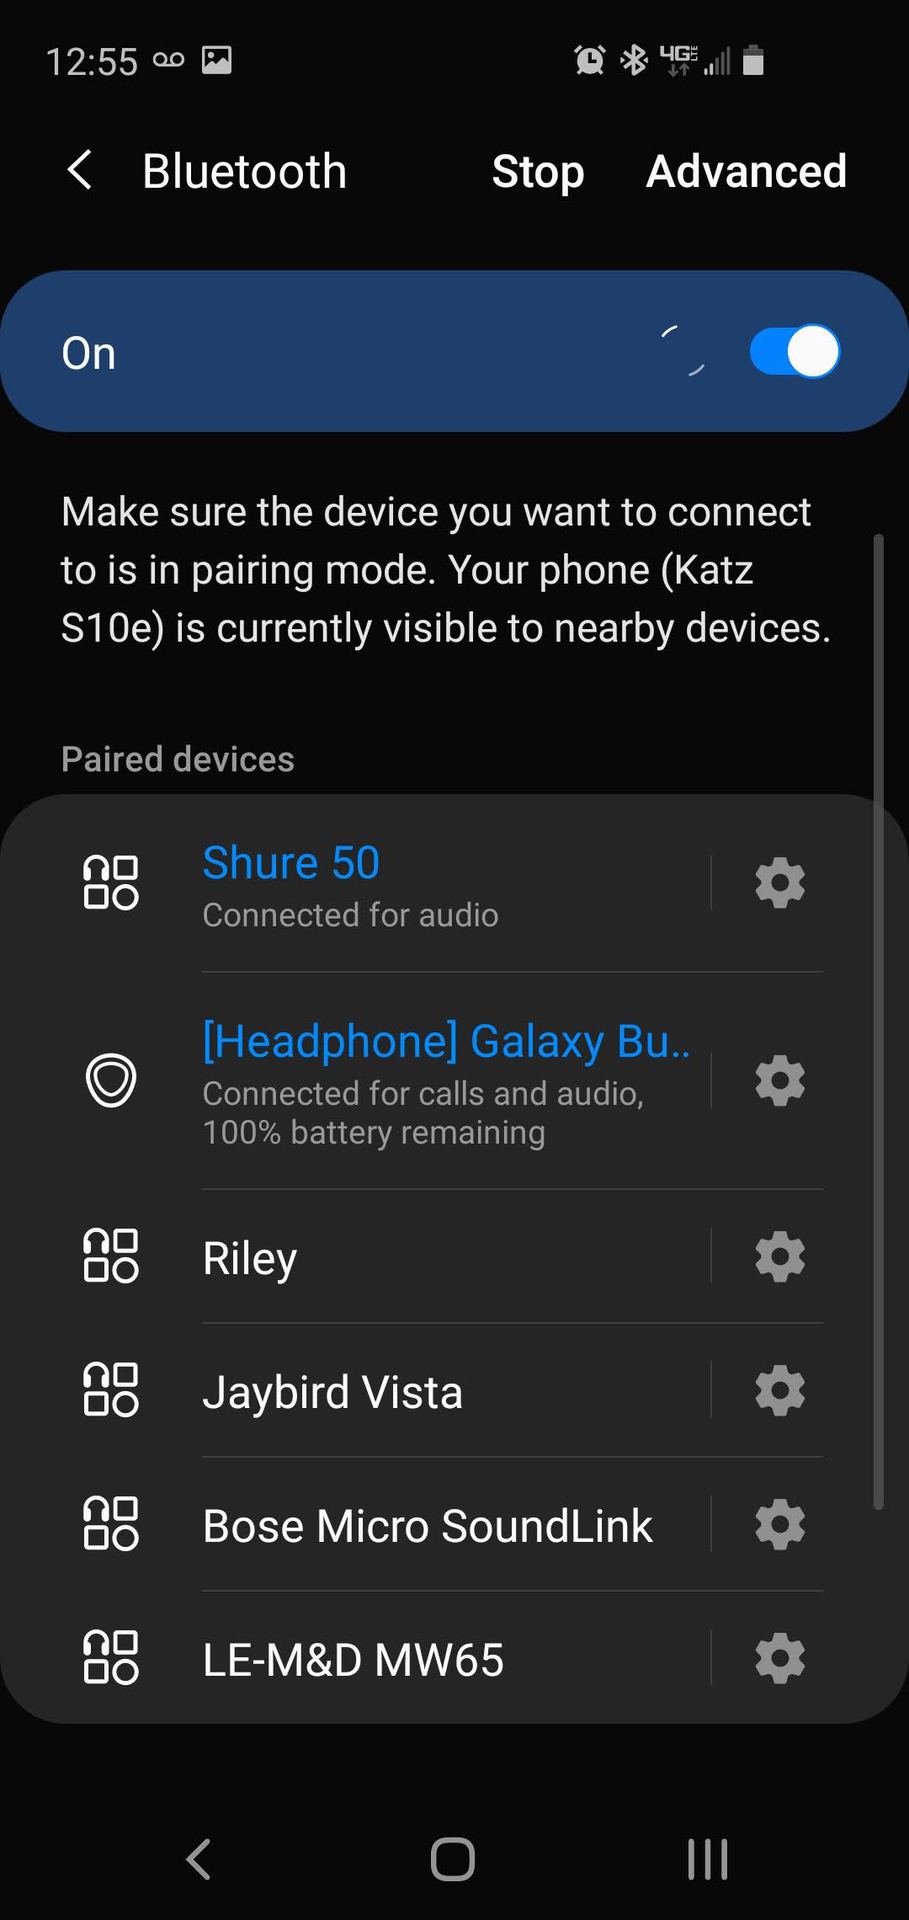 Samsung Dual Connect screenshot displaying two Bluetooth headsets connected to the Samsung Galaxy S10e.